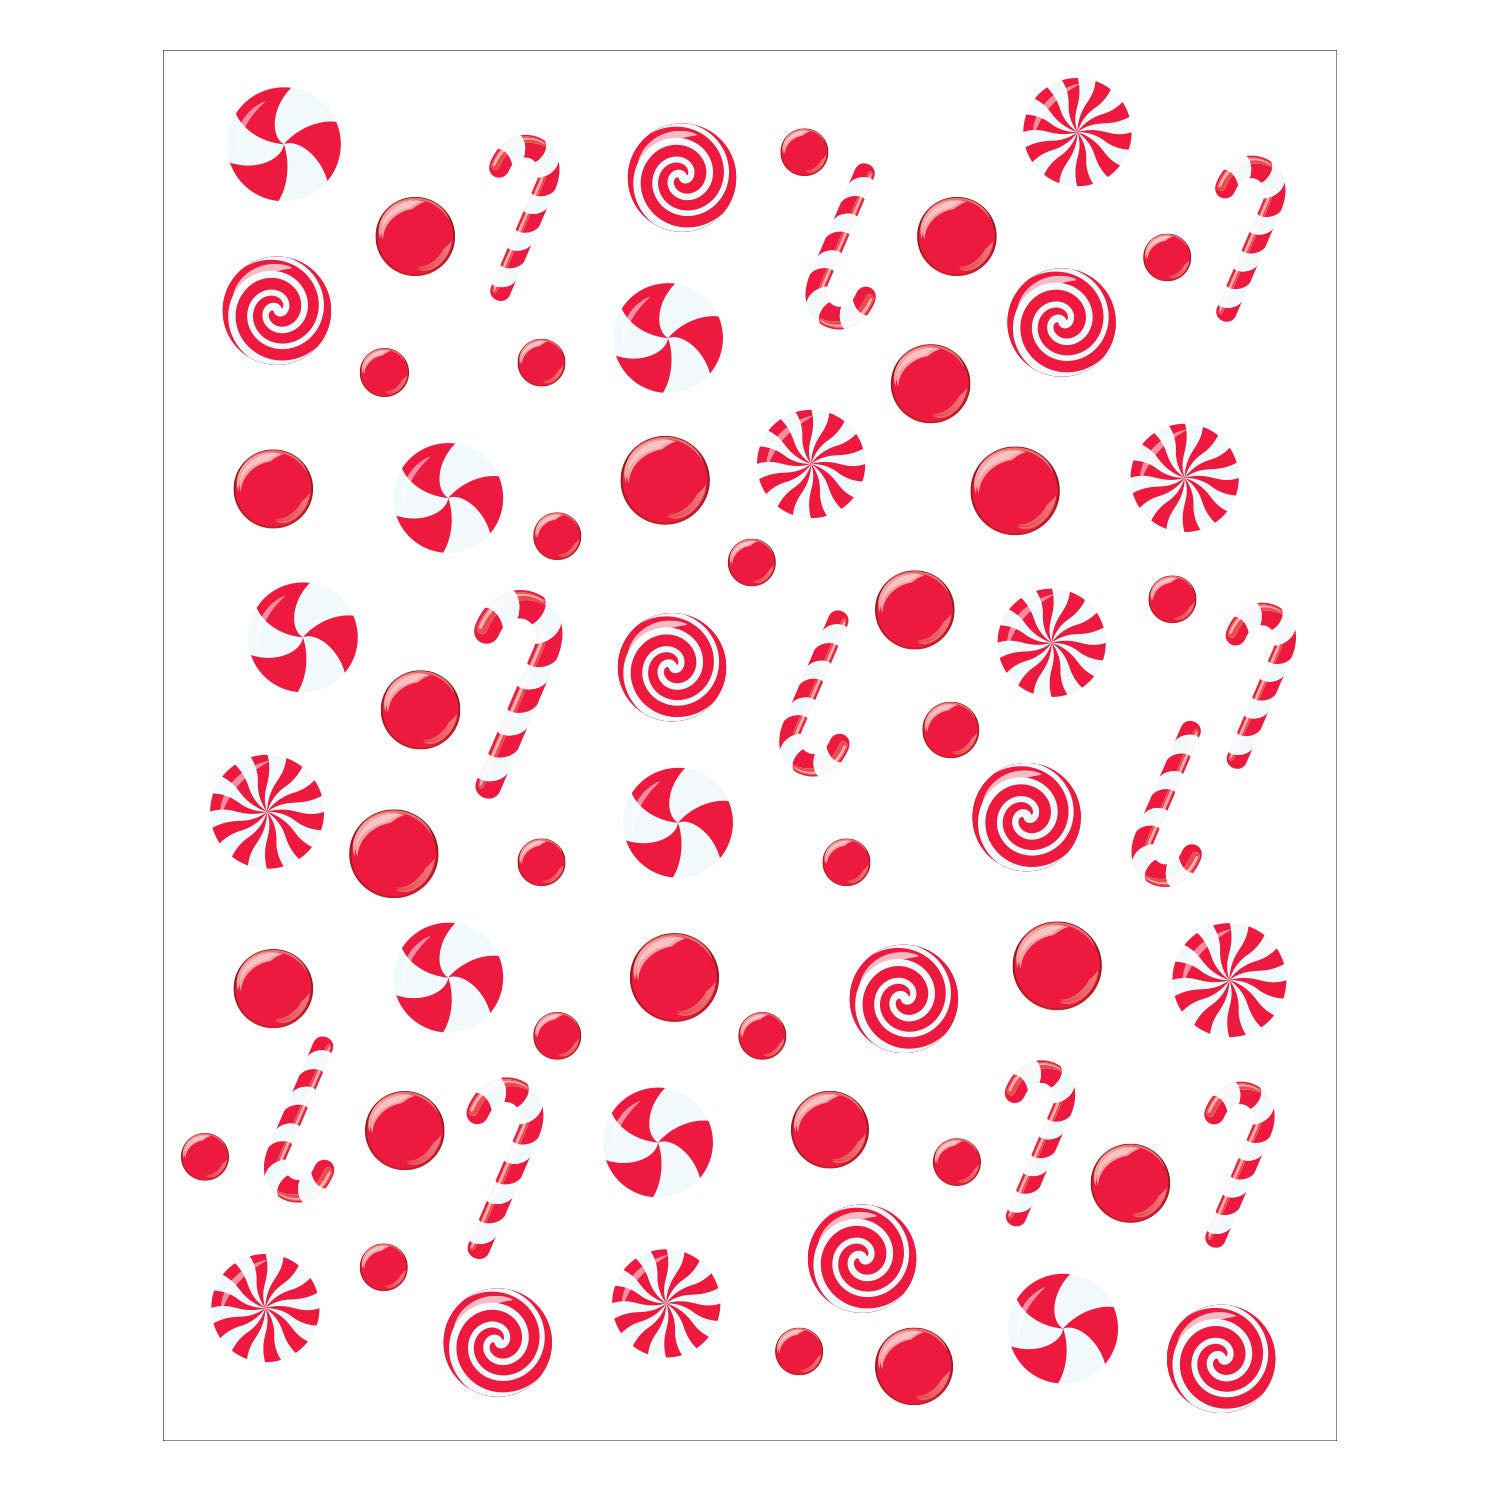 One sheet of Peppermint Swirl Nail Art Stickers on a white background.